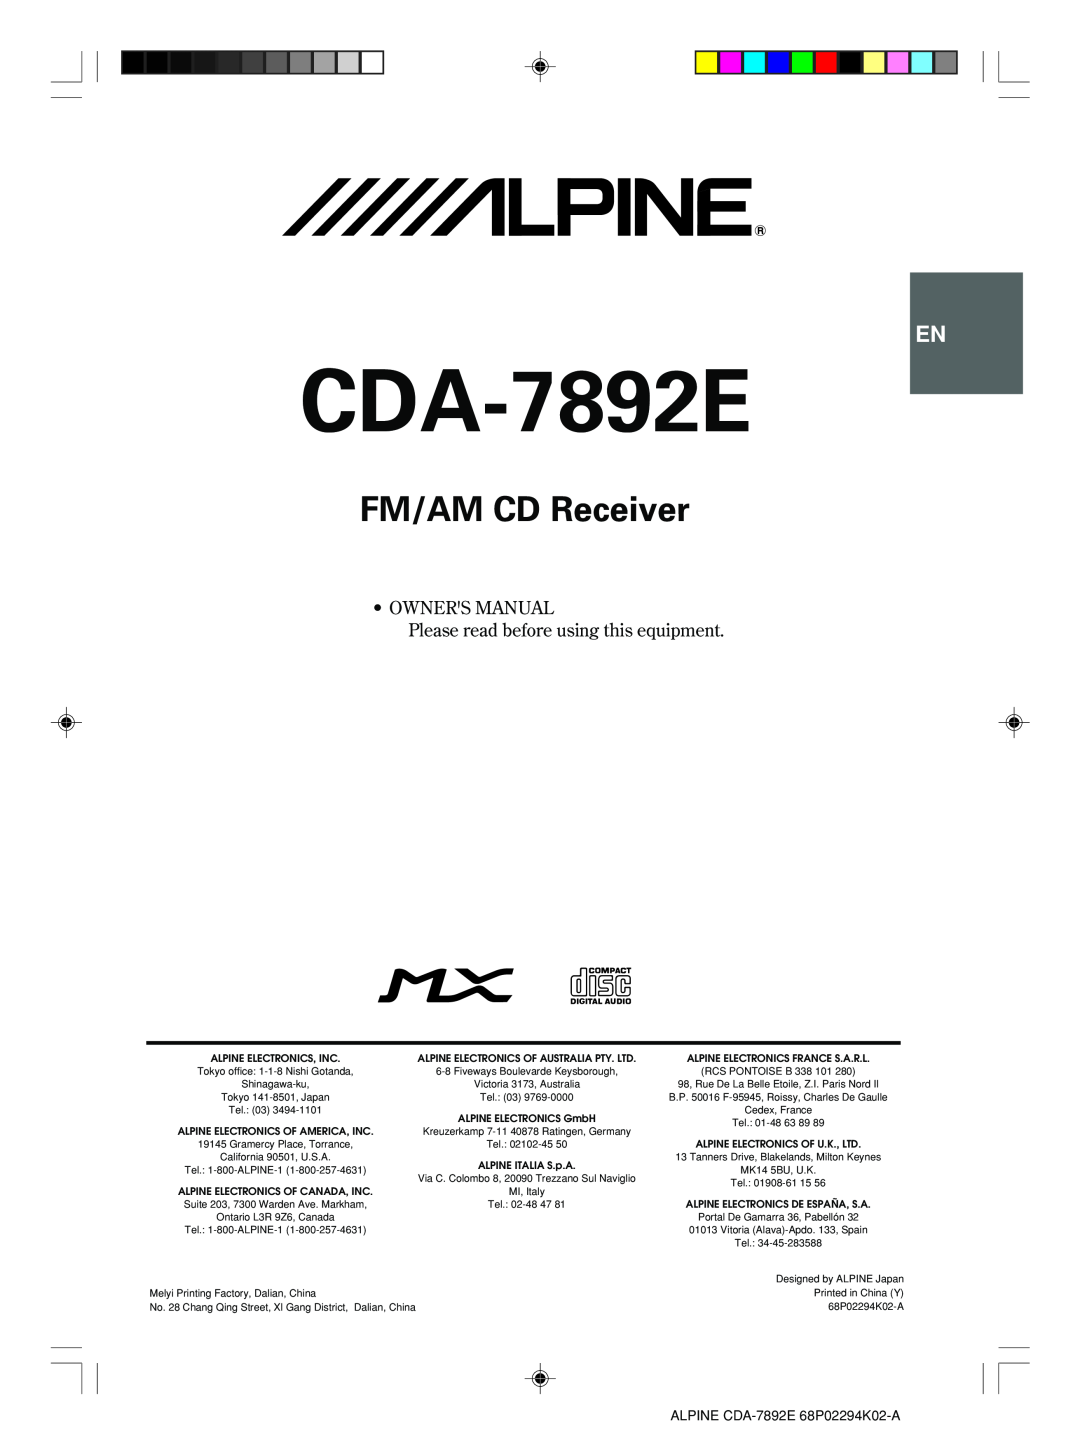 Alpine CDA-7892E owner manual FM/AM CD Receiver, Please read before using this equipment 